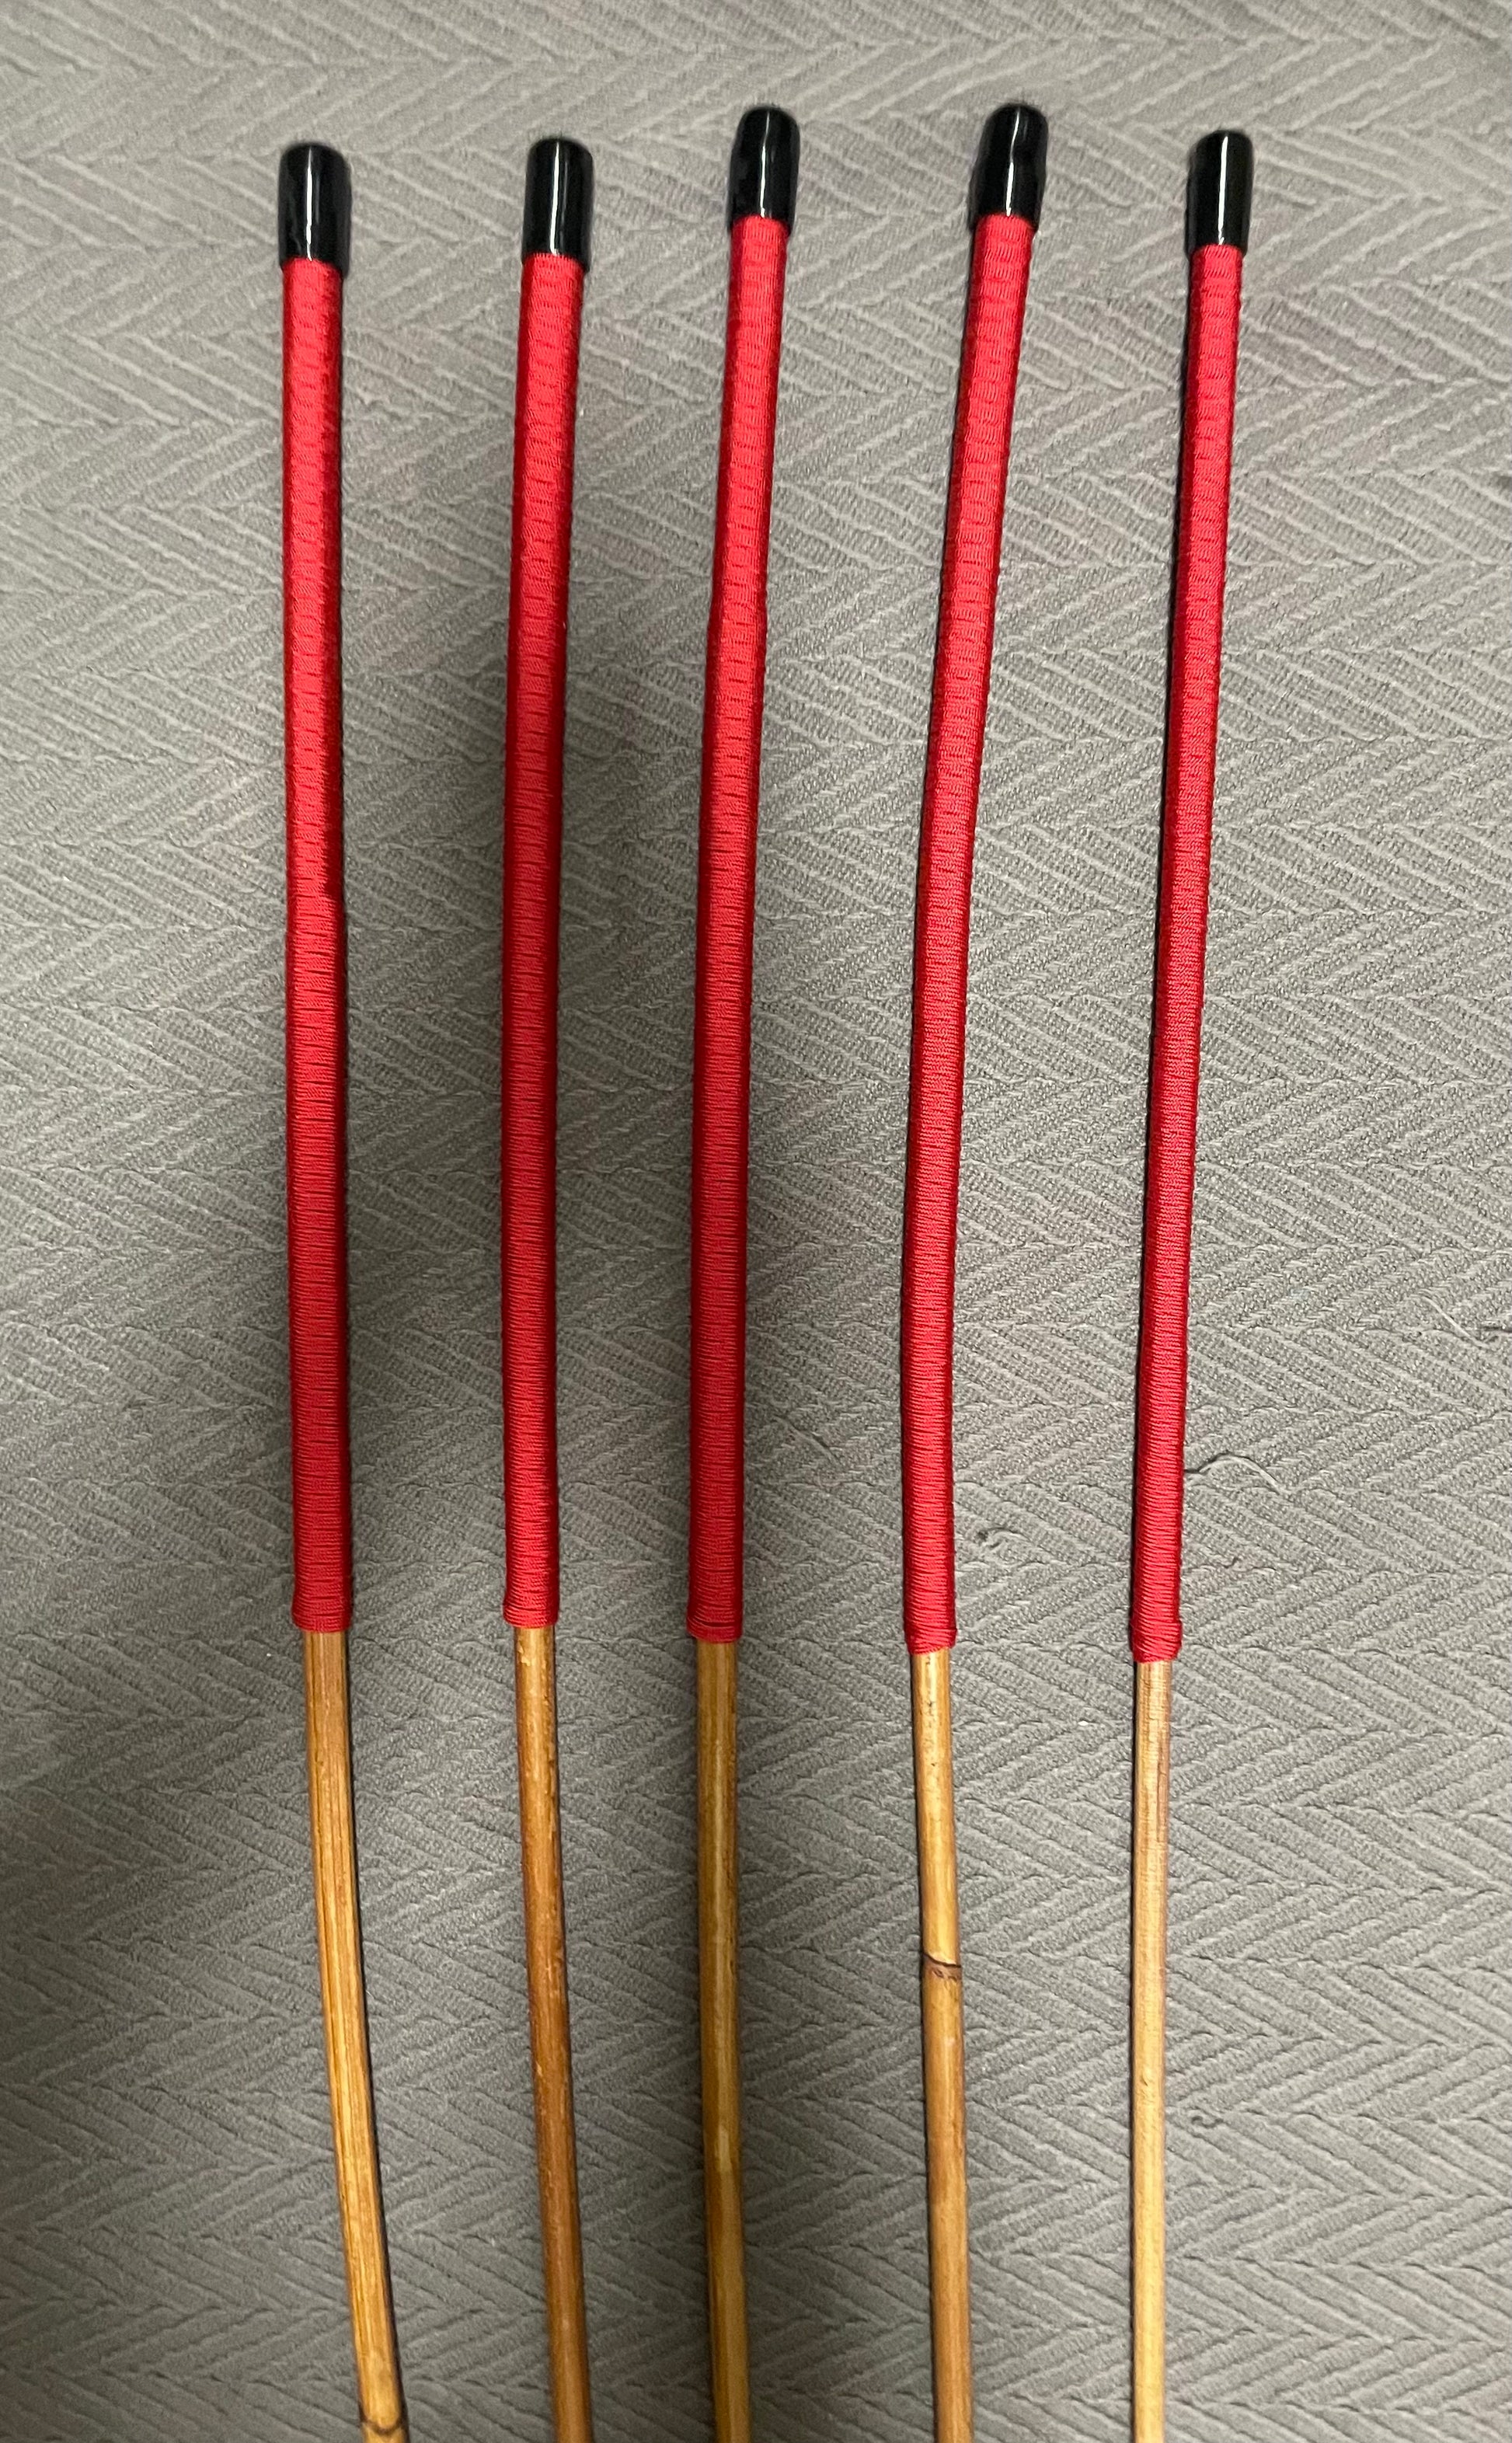 Set of 5 Smoked Dragon Rattan Canes with Imperial Red Paracord Handles - 100 cms Length - 7 - 11.5 mm Diameters - Englishvice Canes